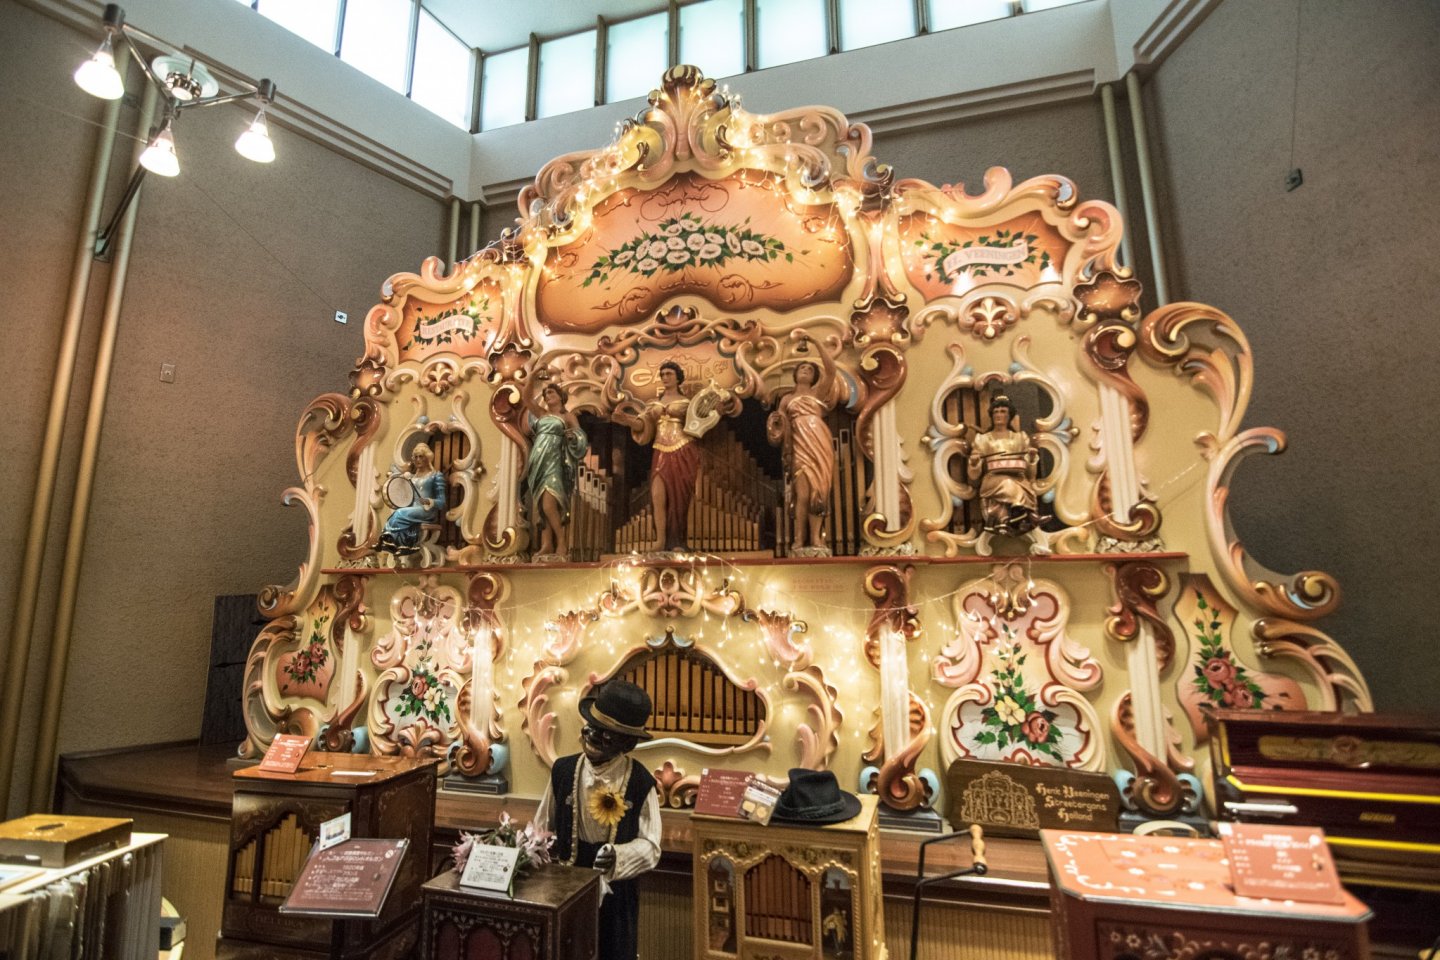 The biggest orgel, and the star attraction of the Hamanako Orgel Museum, this 6-meter tall instrument sounds like a one-machine orchestra. Furthermore, the individual figures on the orgel move along to the music as well.